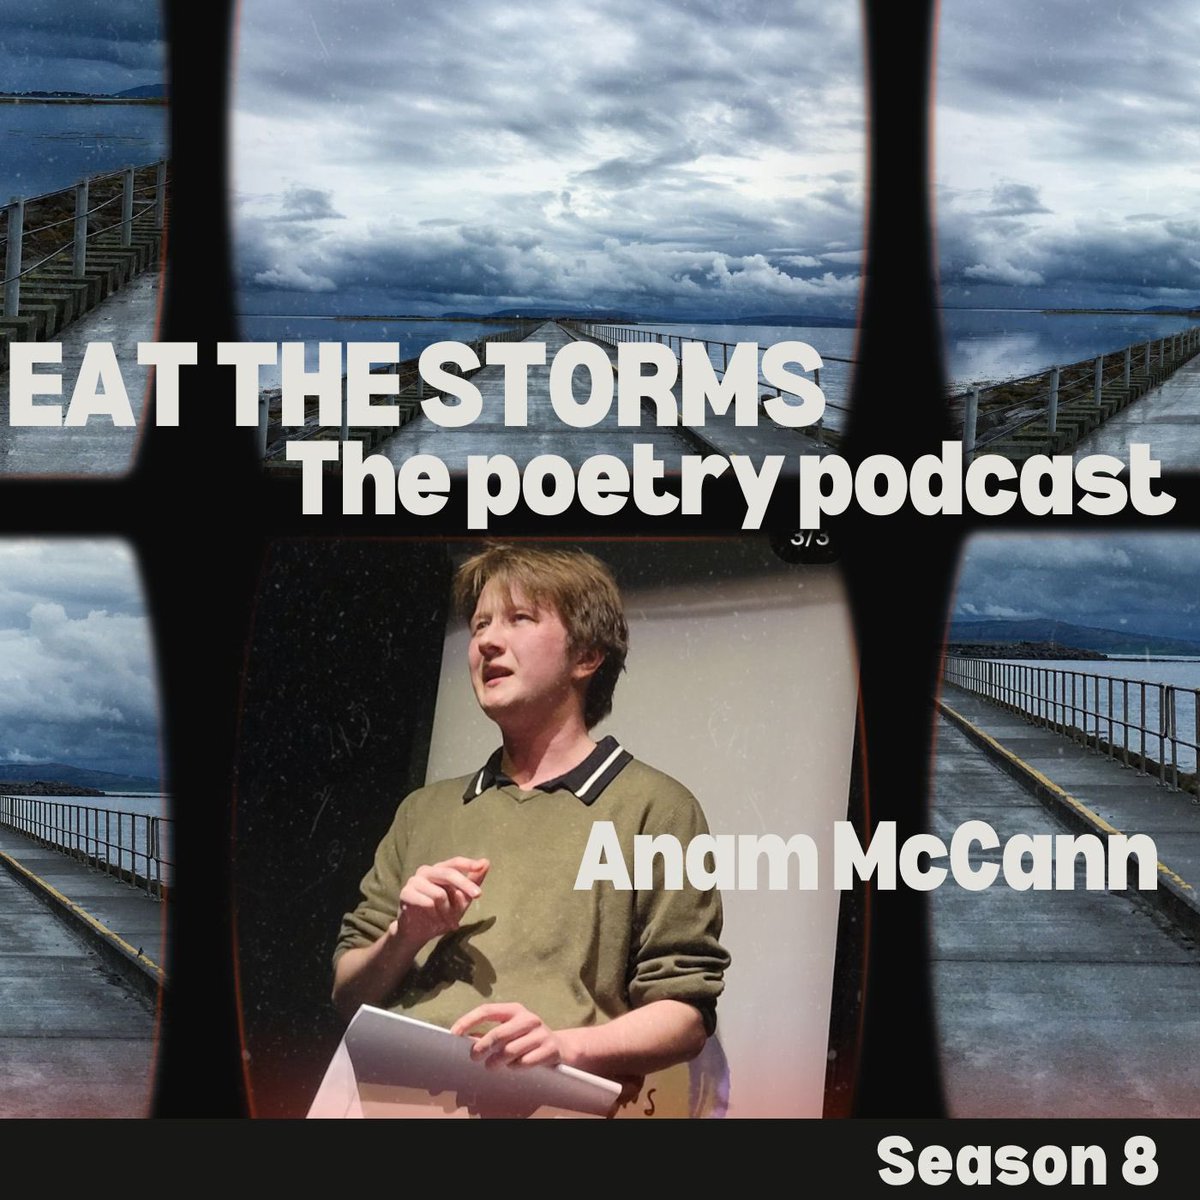 This Saturday Dublin spoken word performer Anam McCann joins the #poetry #podcast now available on most podcast platforms including @Spotify @ApplePodcasts and @podbeancom Tune in from 5pm to Stay Bloody Poetic